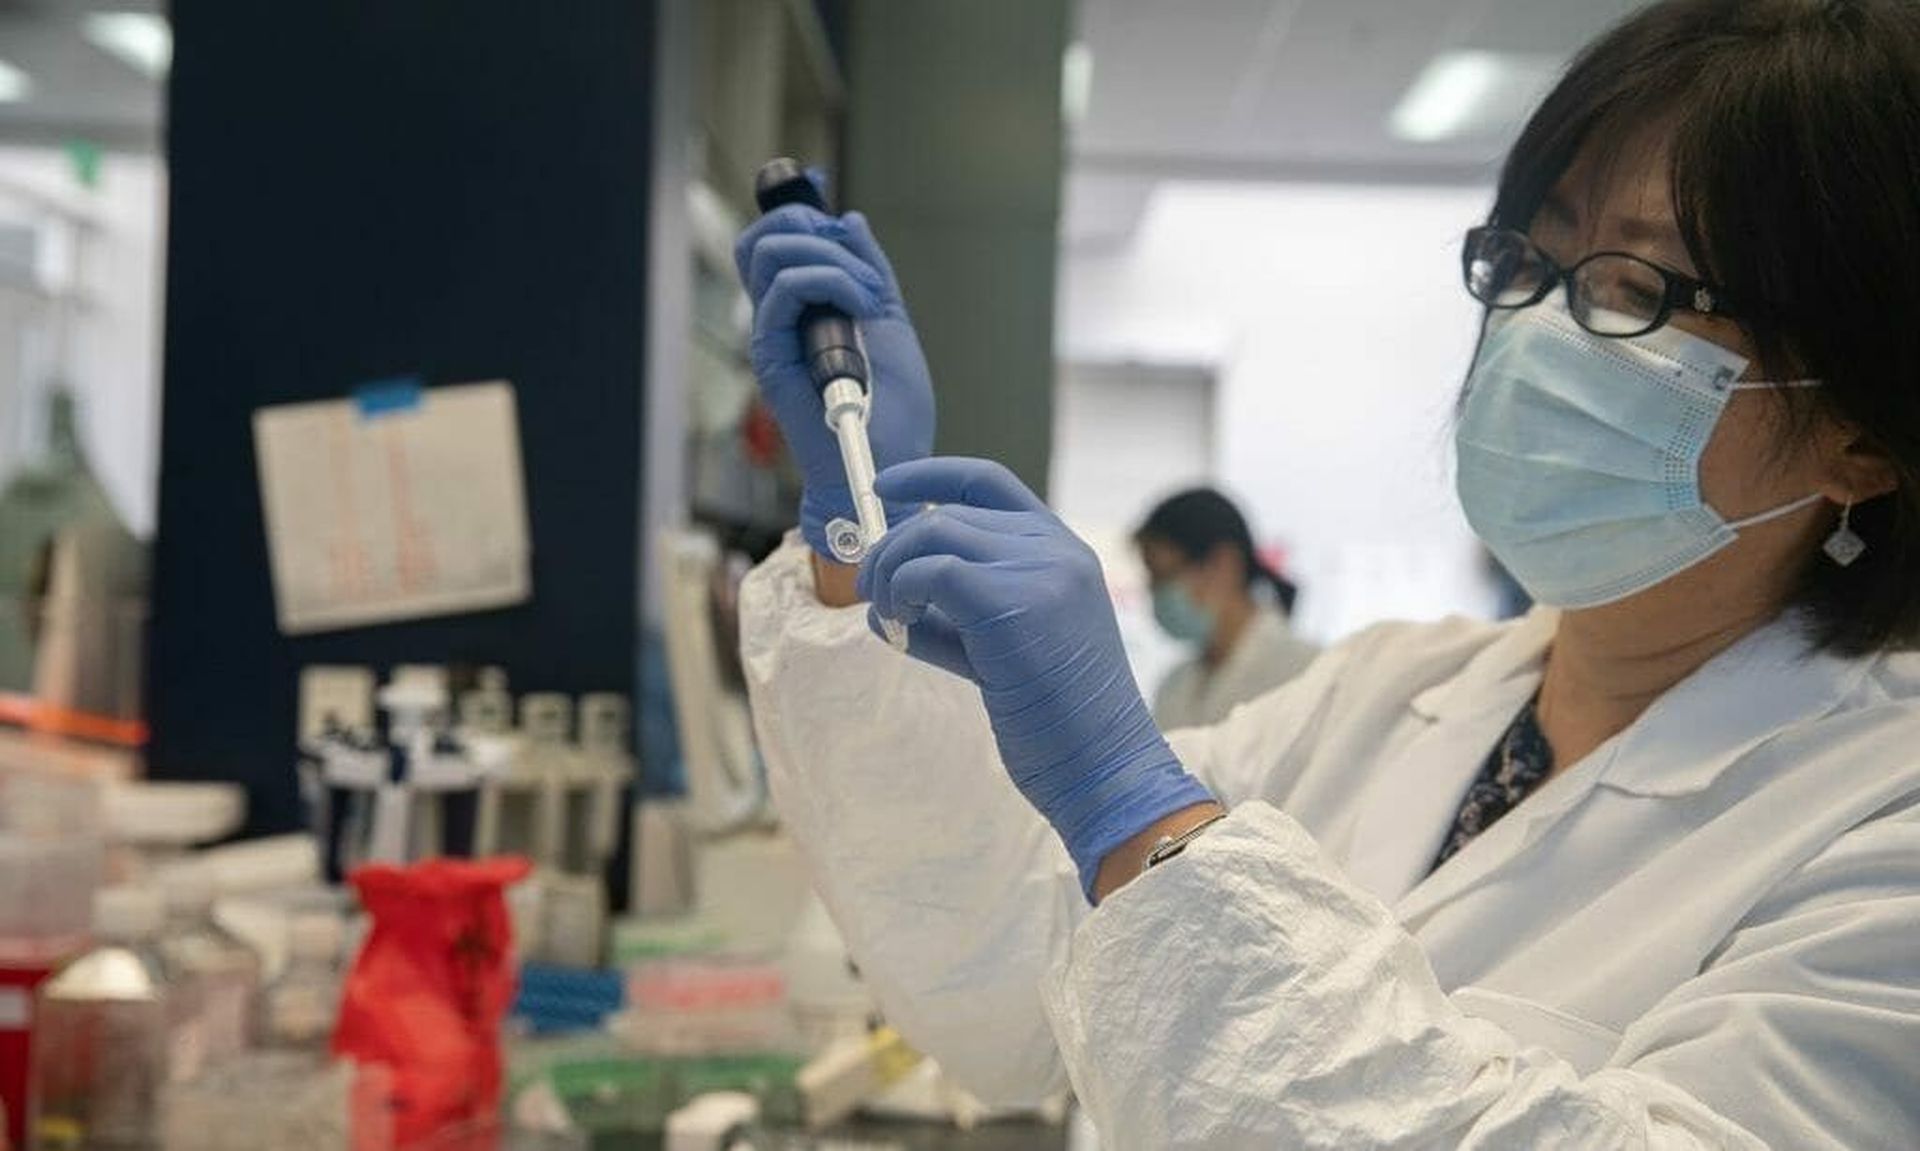 Bonghui Li works in a lab that is focused on fighting COVID-19 at Sorrento Therapeutics in San Diego on May 22, 2020. (Ariana Drehsler/AFP via Getty Images)